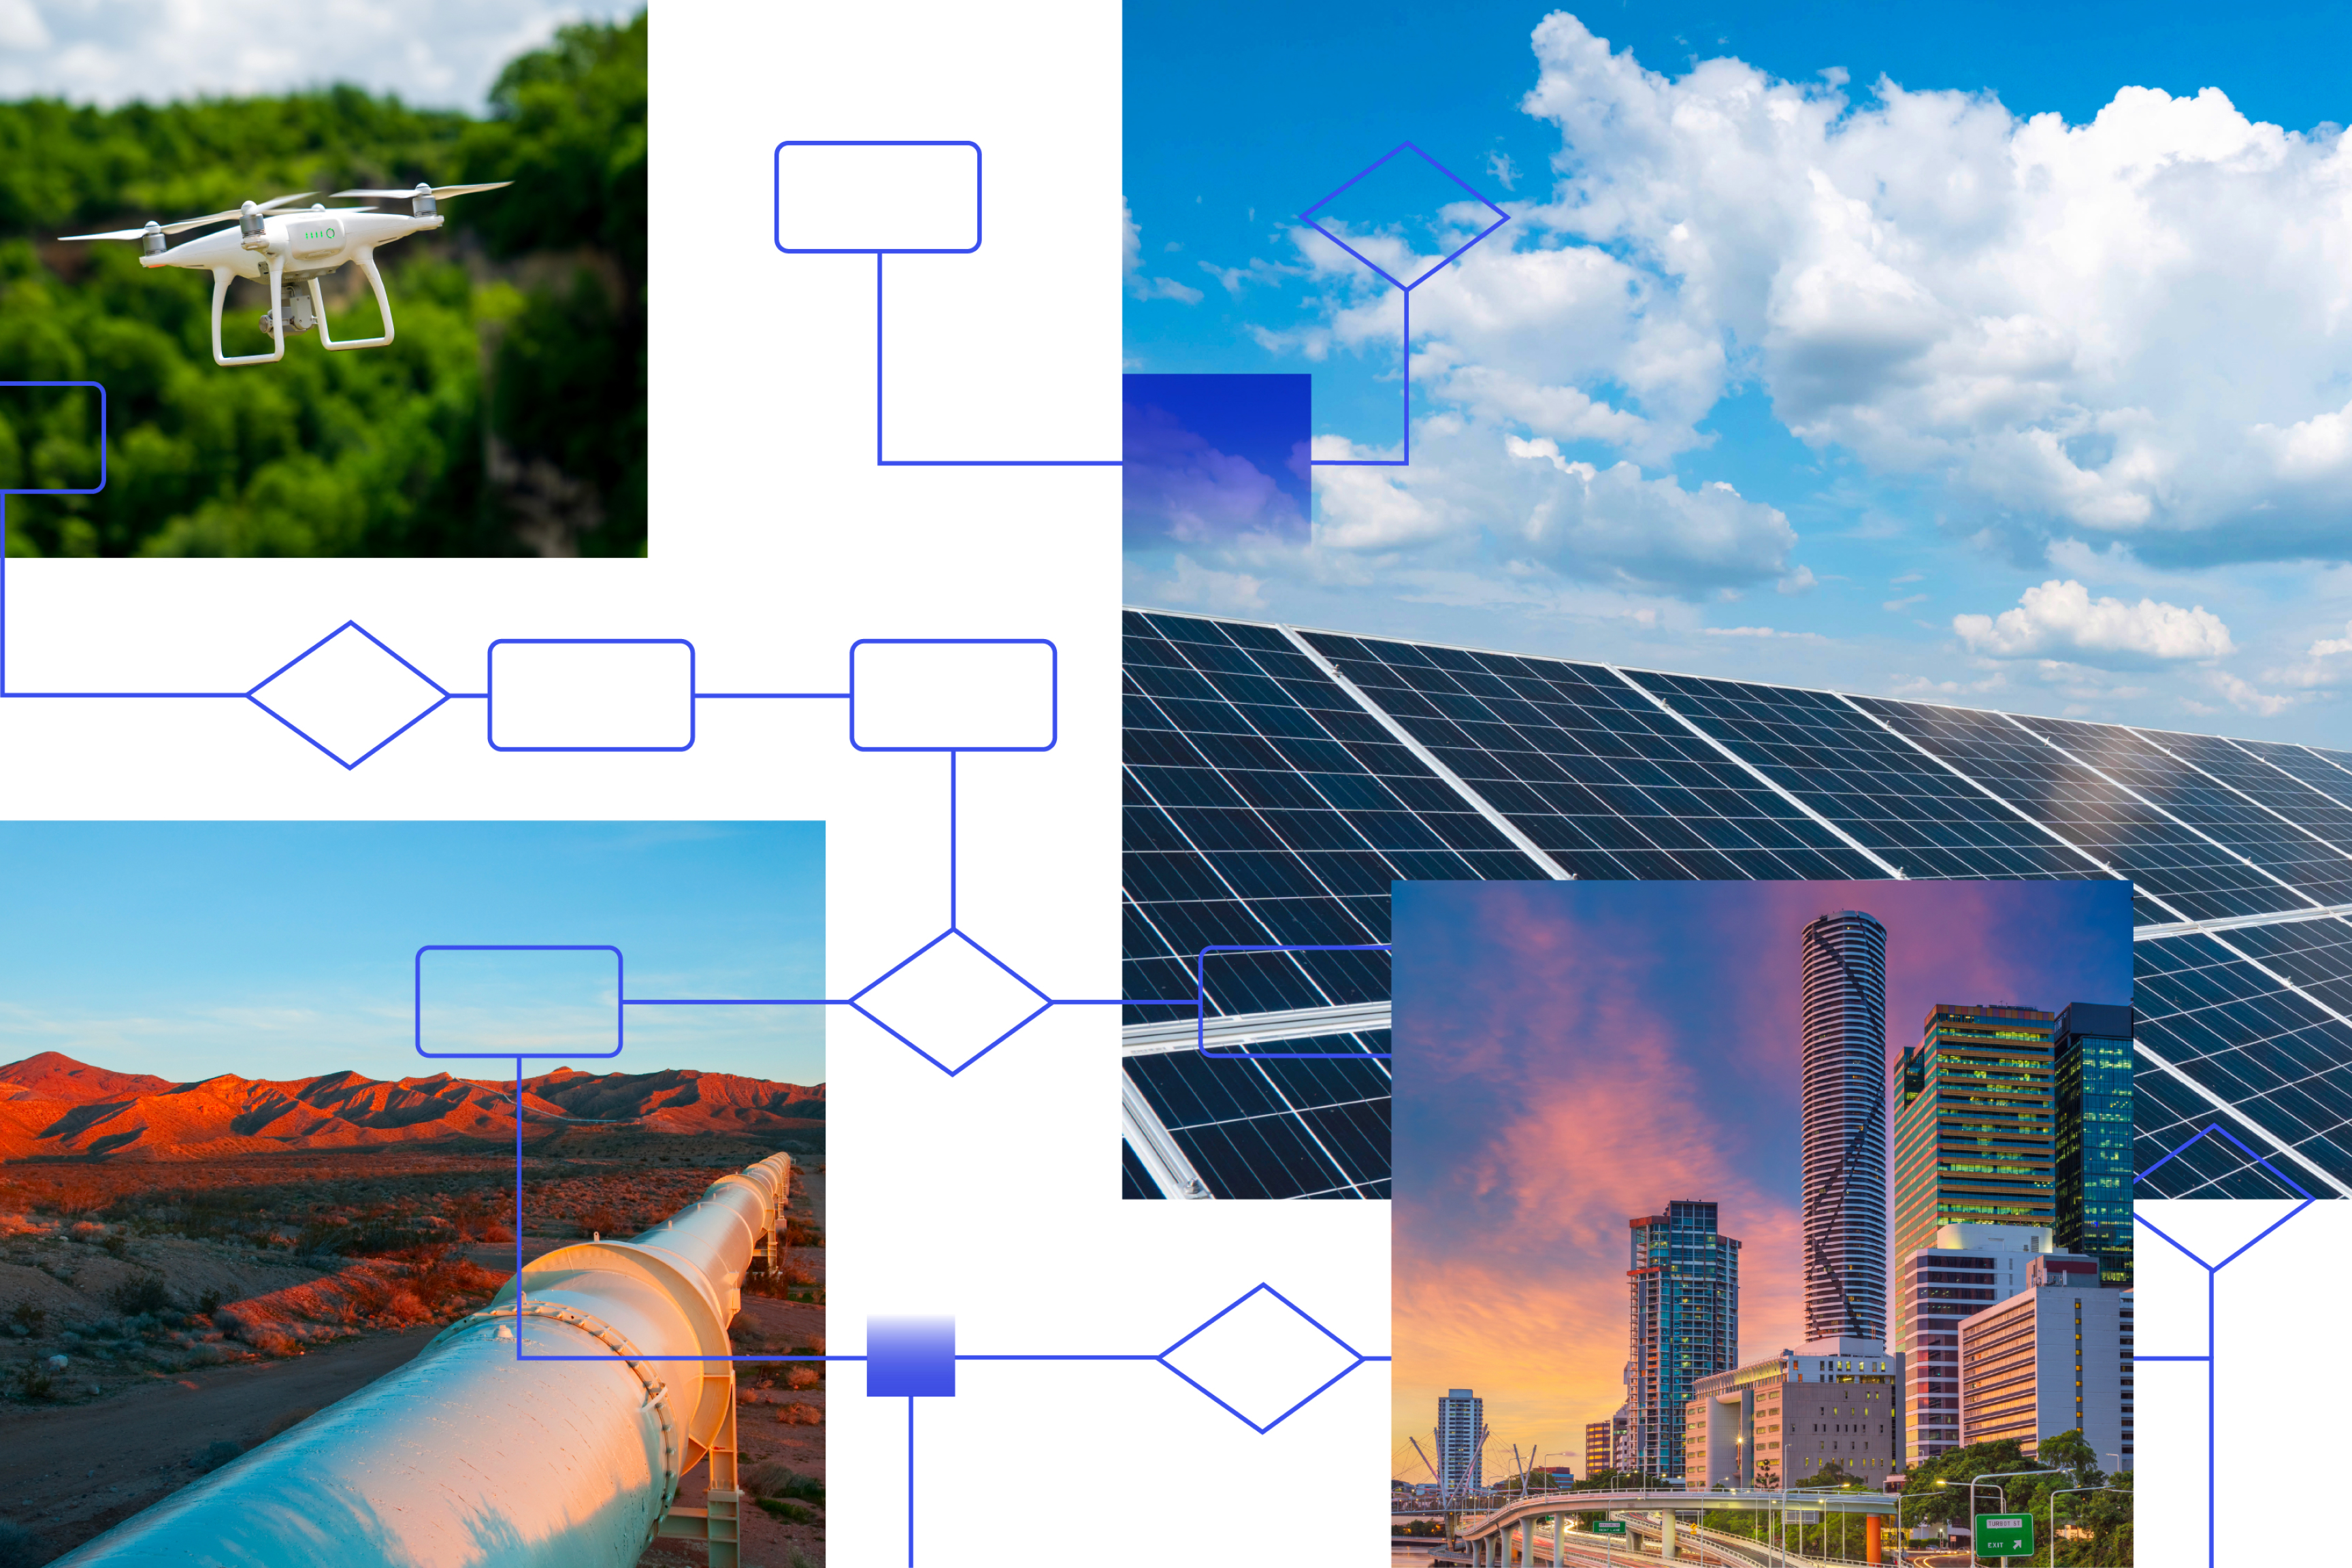 Collection of images showing a flying drone, solar panels, a pipeline, and downtown area with tall buildings 